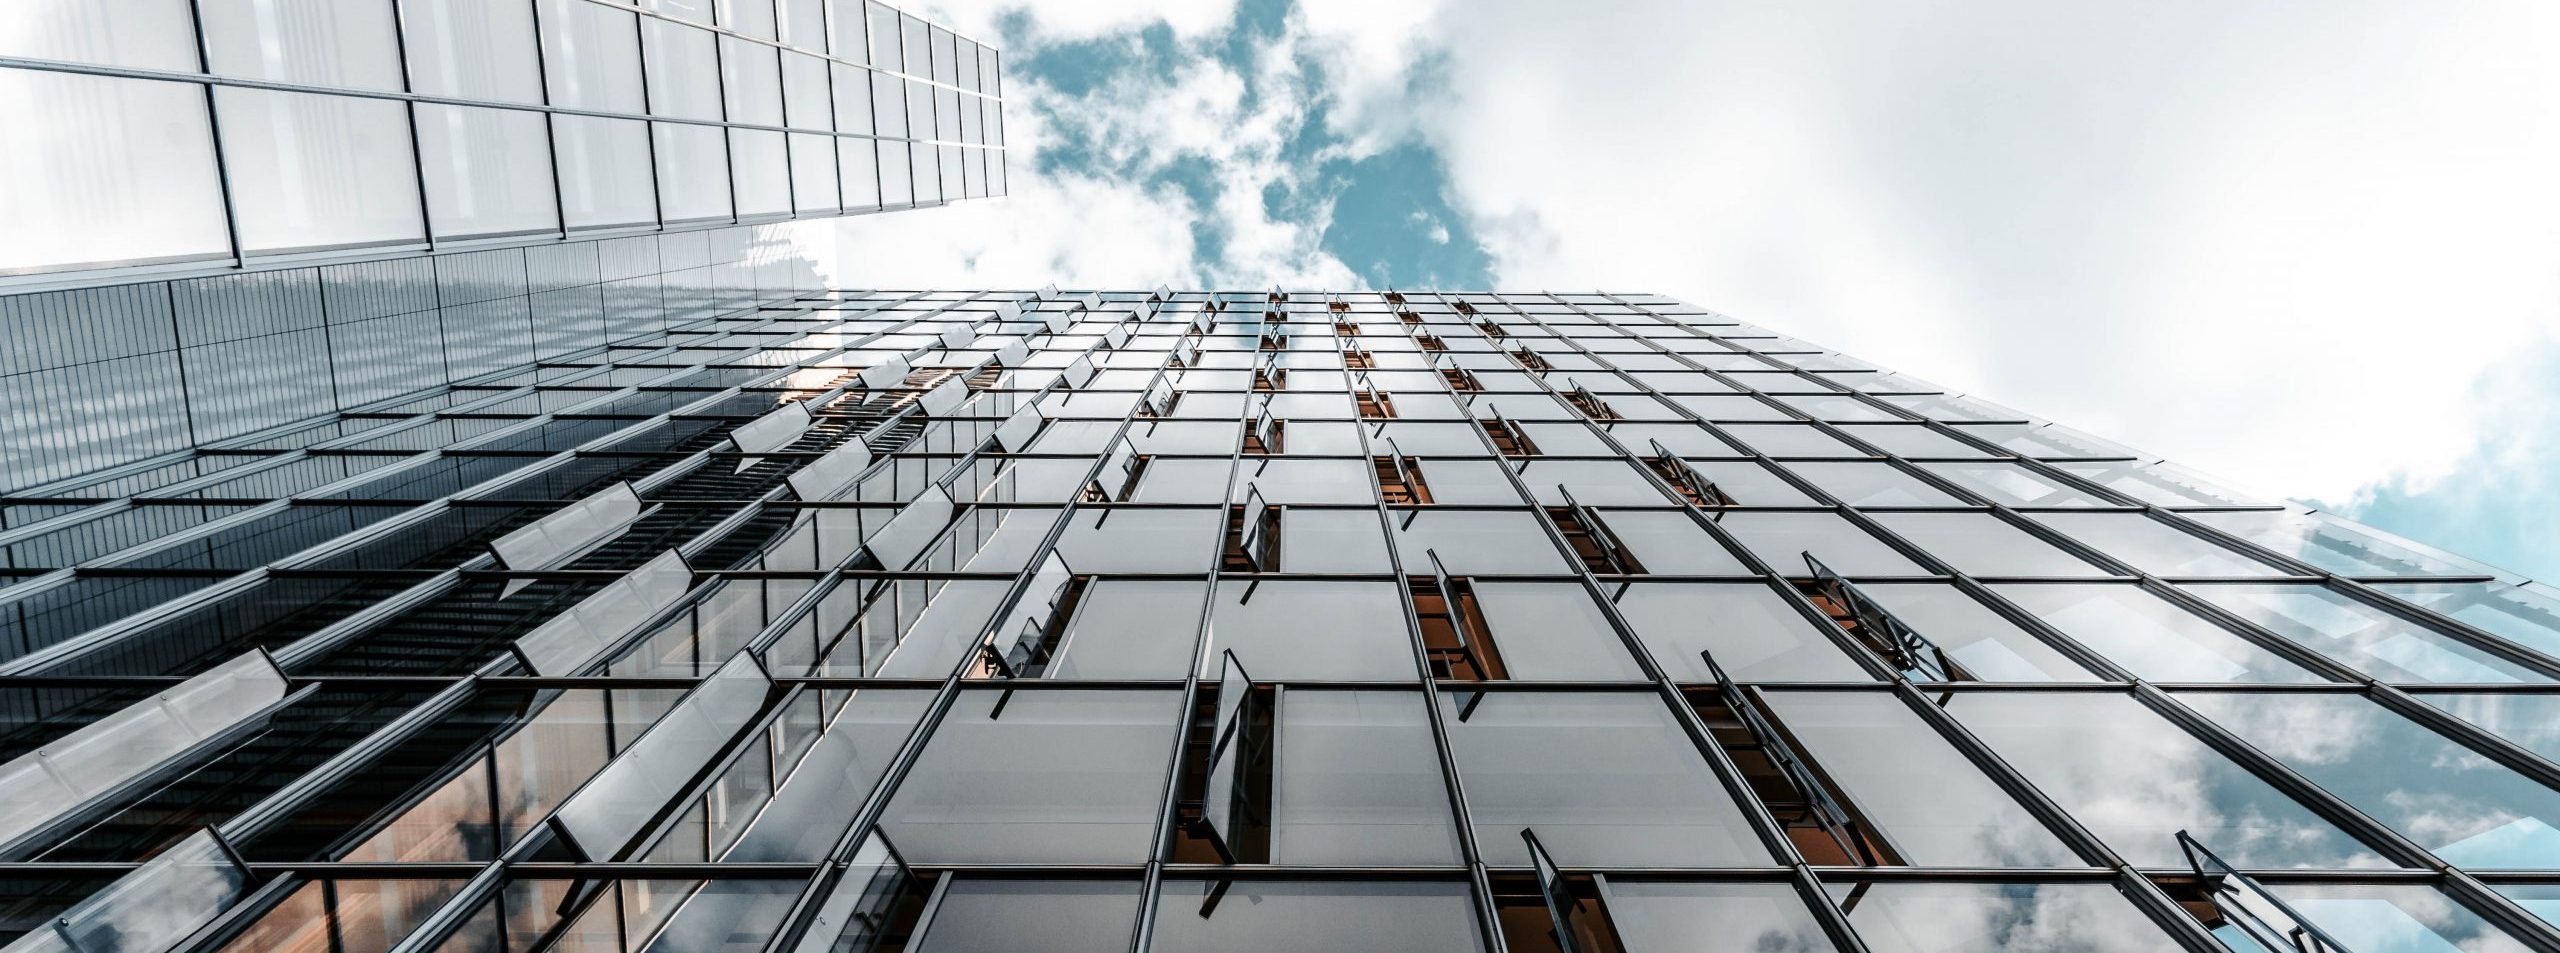 A low-angle photo of a glass building with some open windows against a cloudy blue sky